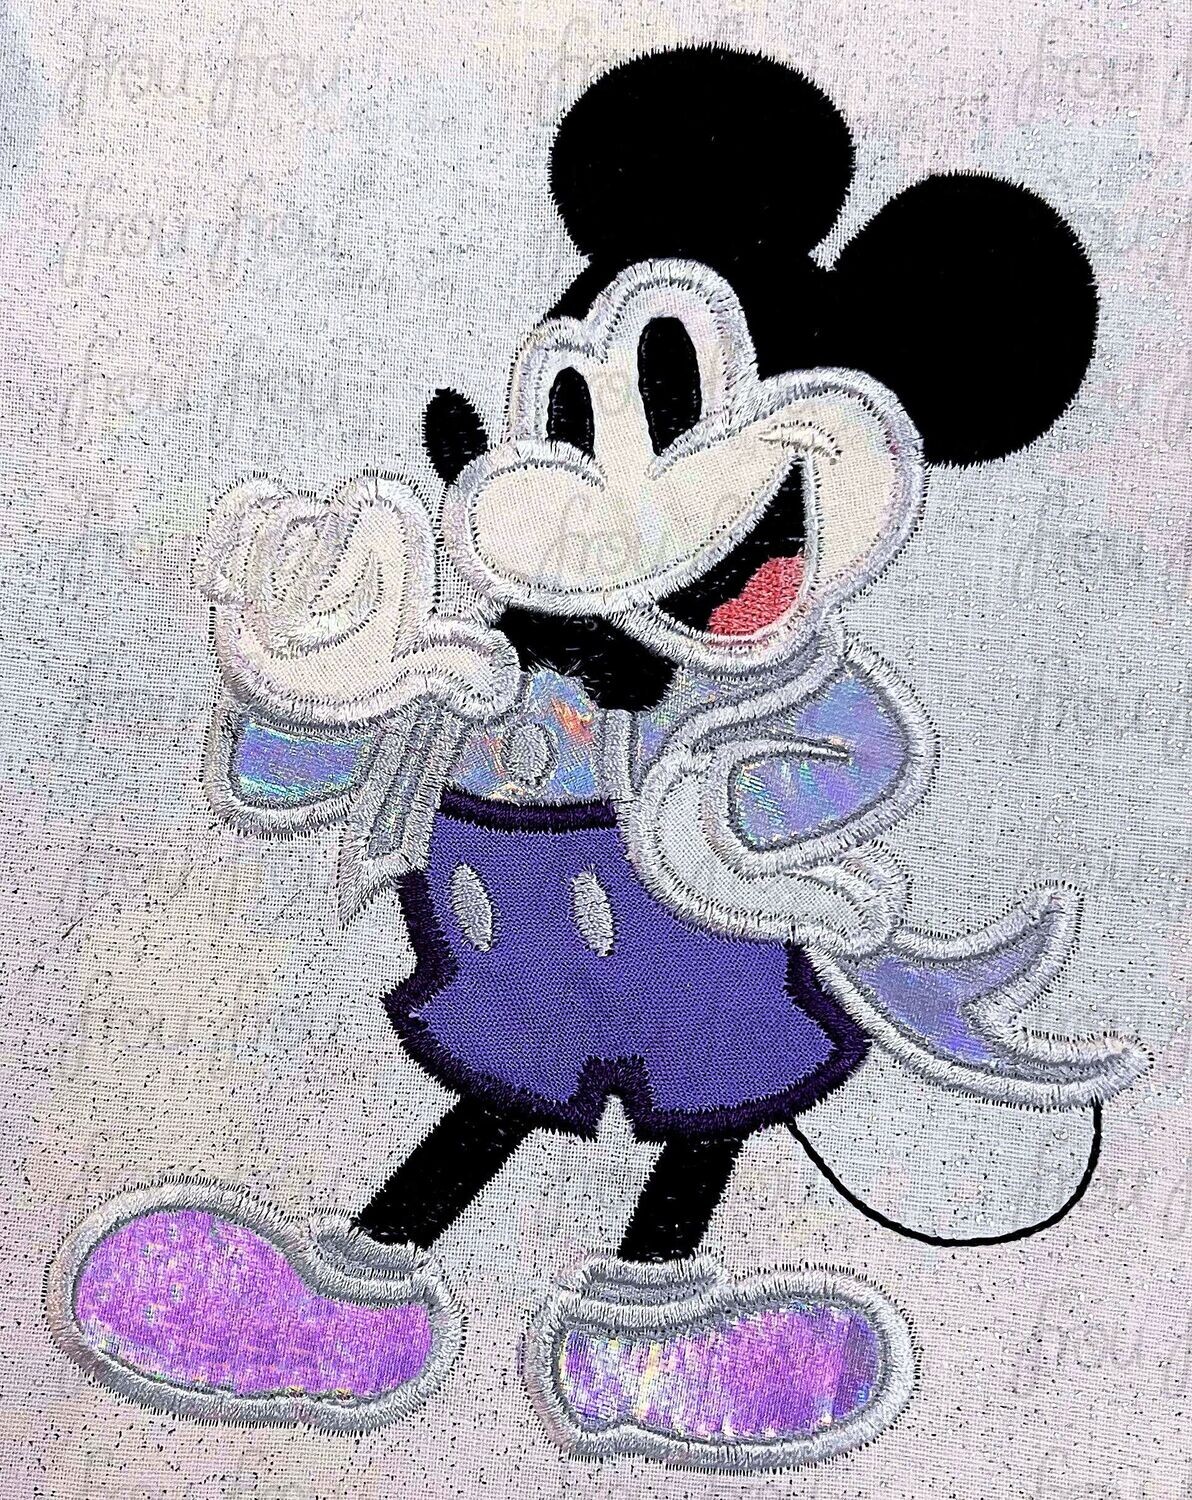 100th Anniversary Mister Mouse Dis World Full Body Machine Applique Embroidery Design, multiple sizes including 3